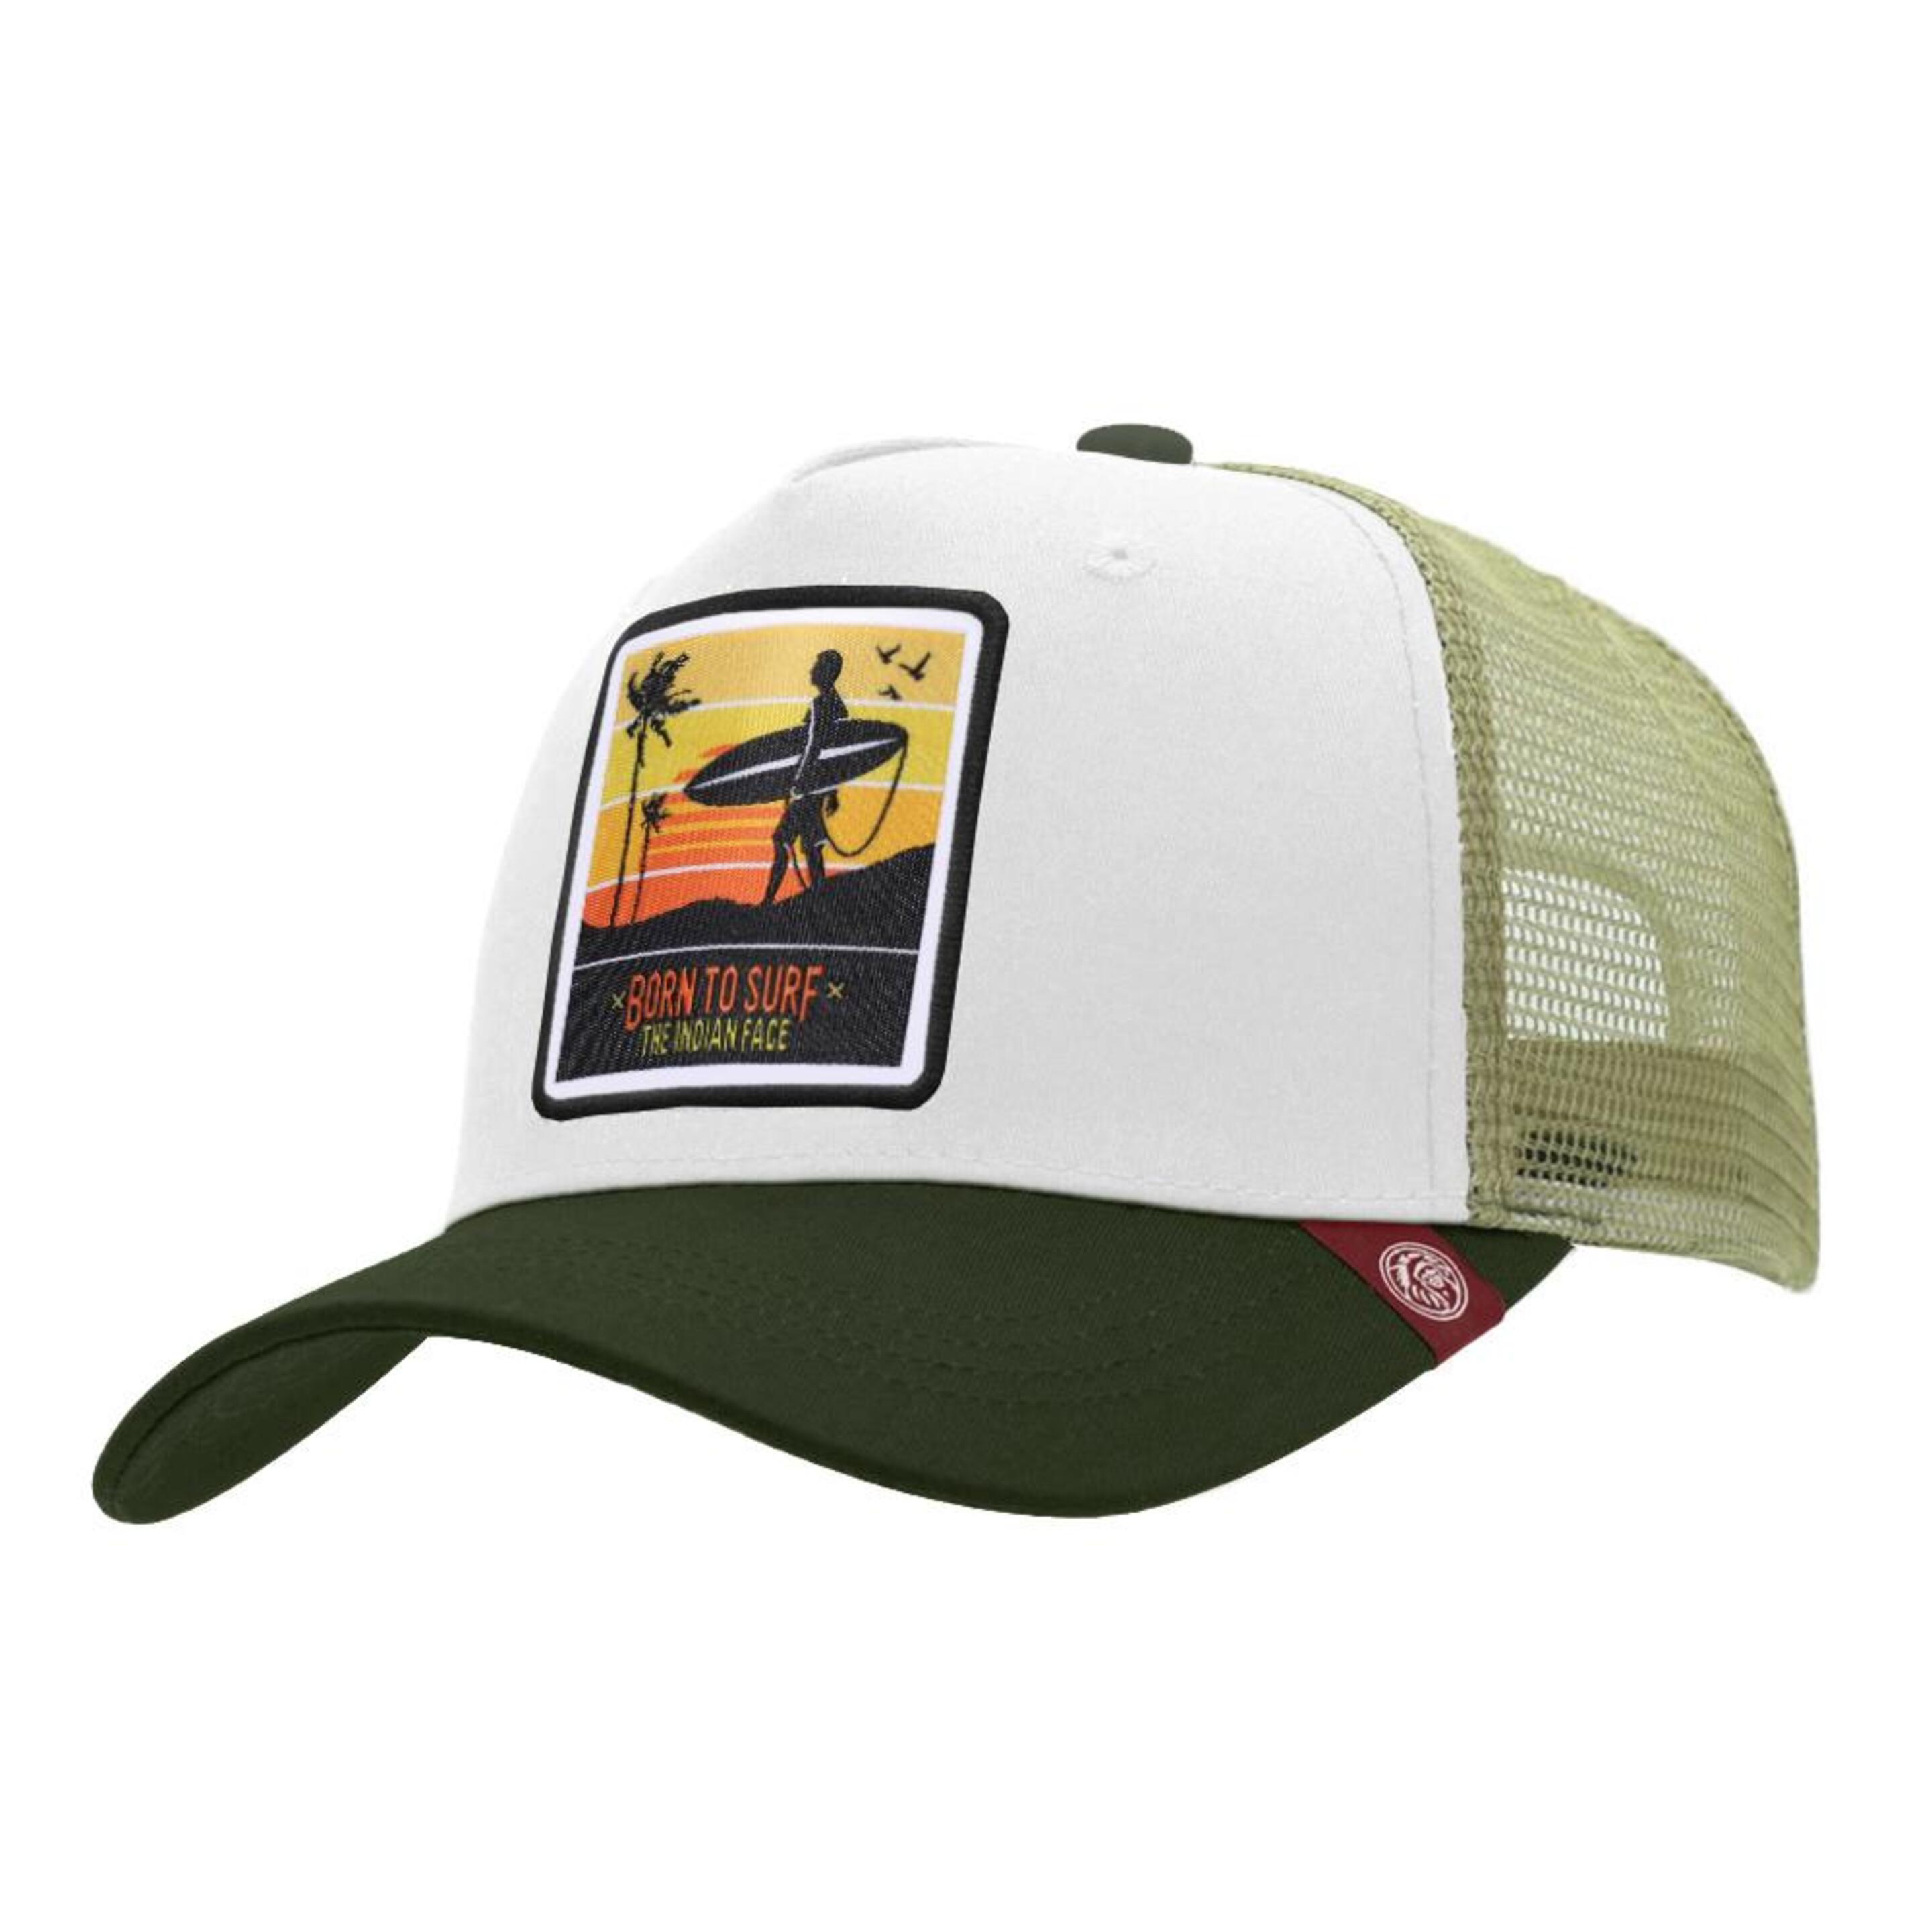 Gorra Trucker Born To Surf Blanca The Indian Face Para Hombre Y Mujer